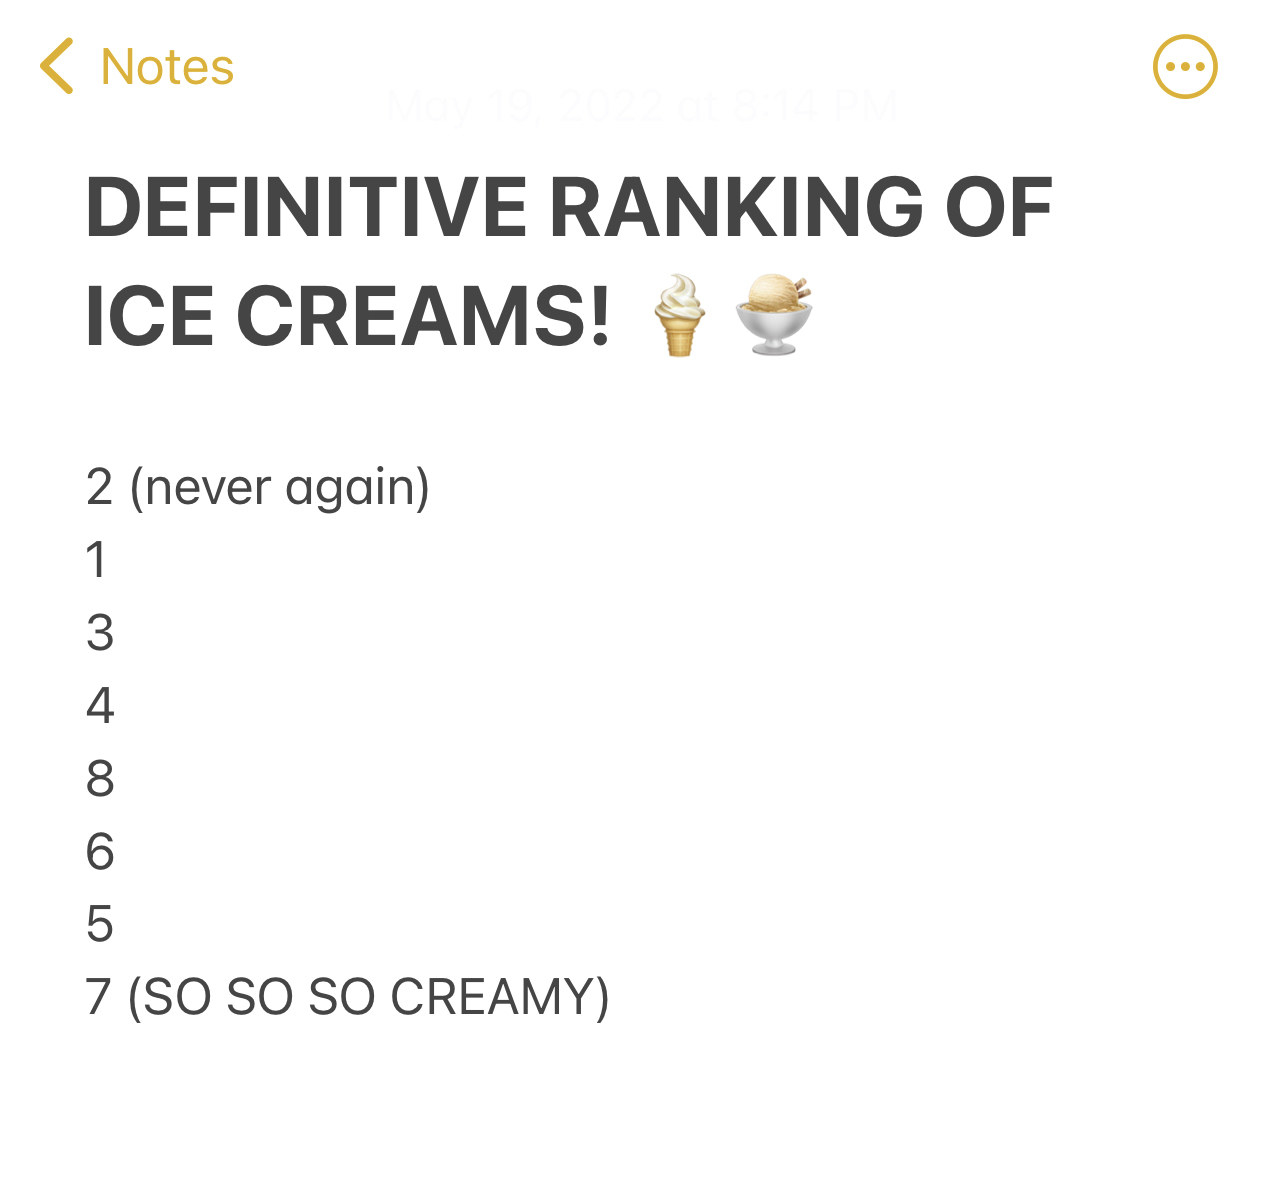 A notes app list titled &quot;DEFINITIVE RANKING OF ICE CREAMS&quot; with rankings 1, 2, and 7 filled out, others left blank